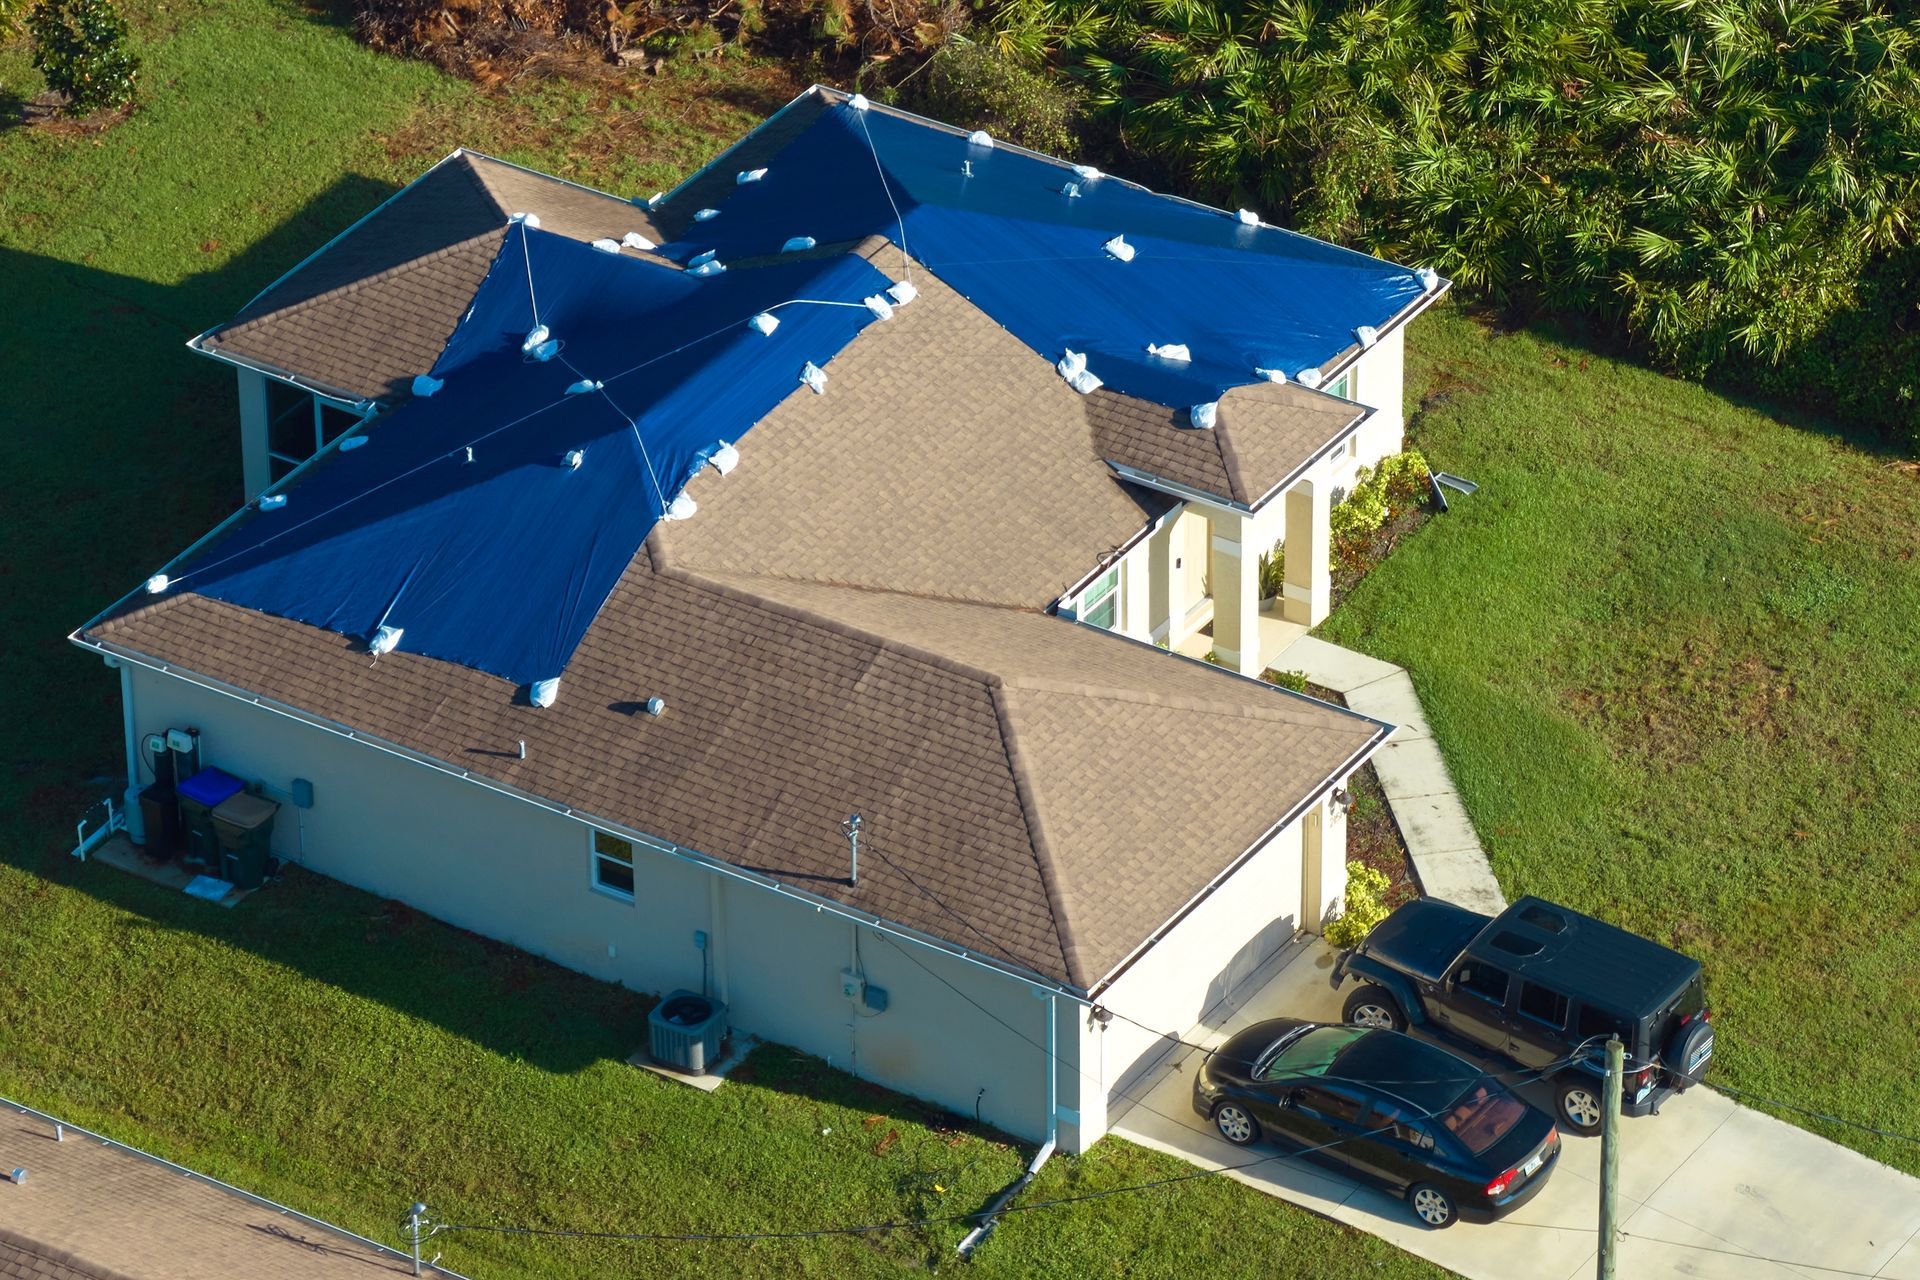 An aerial view of a house with a blue roof